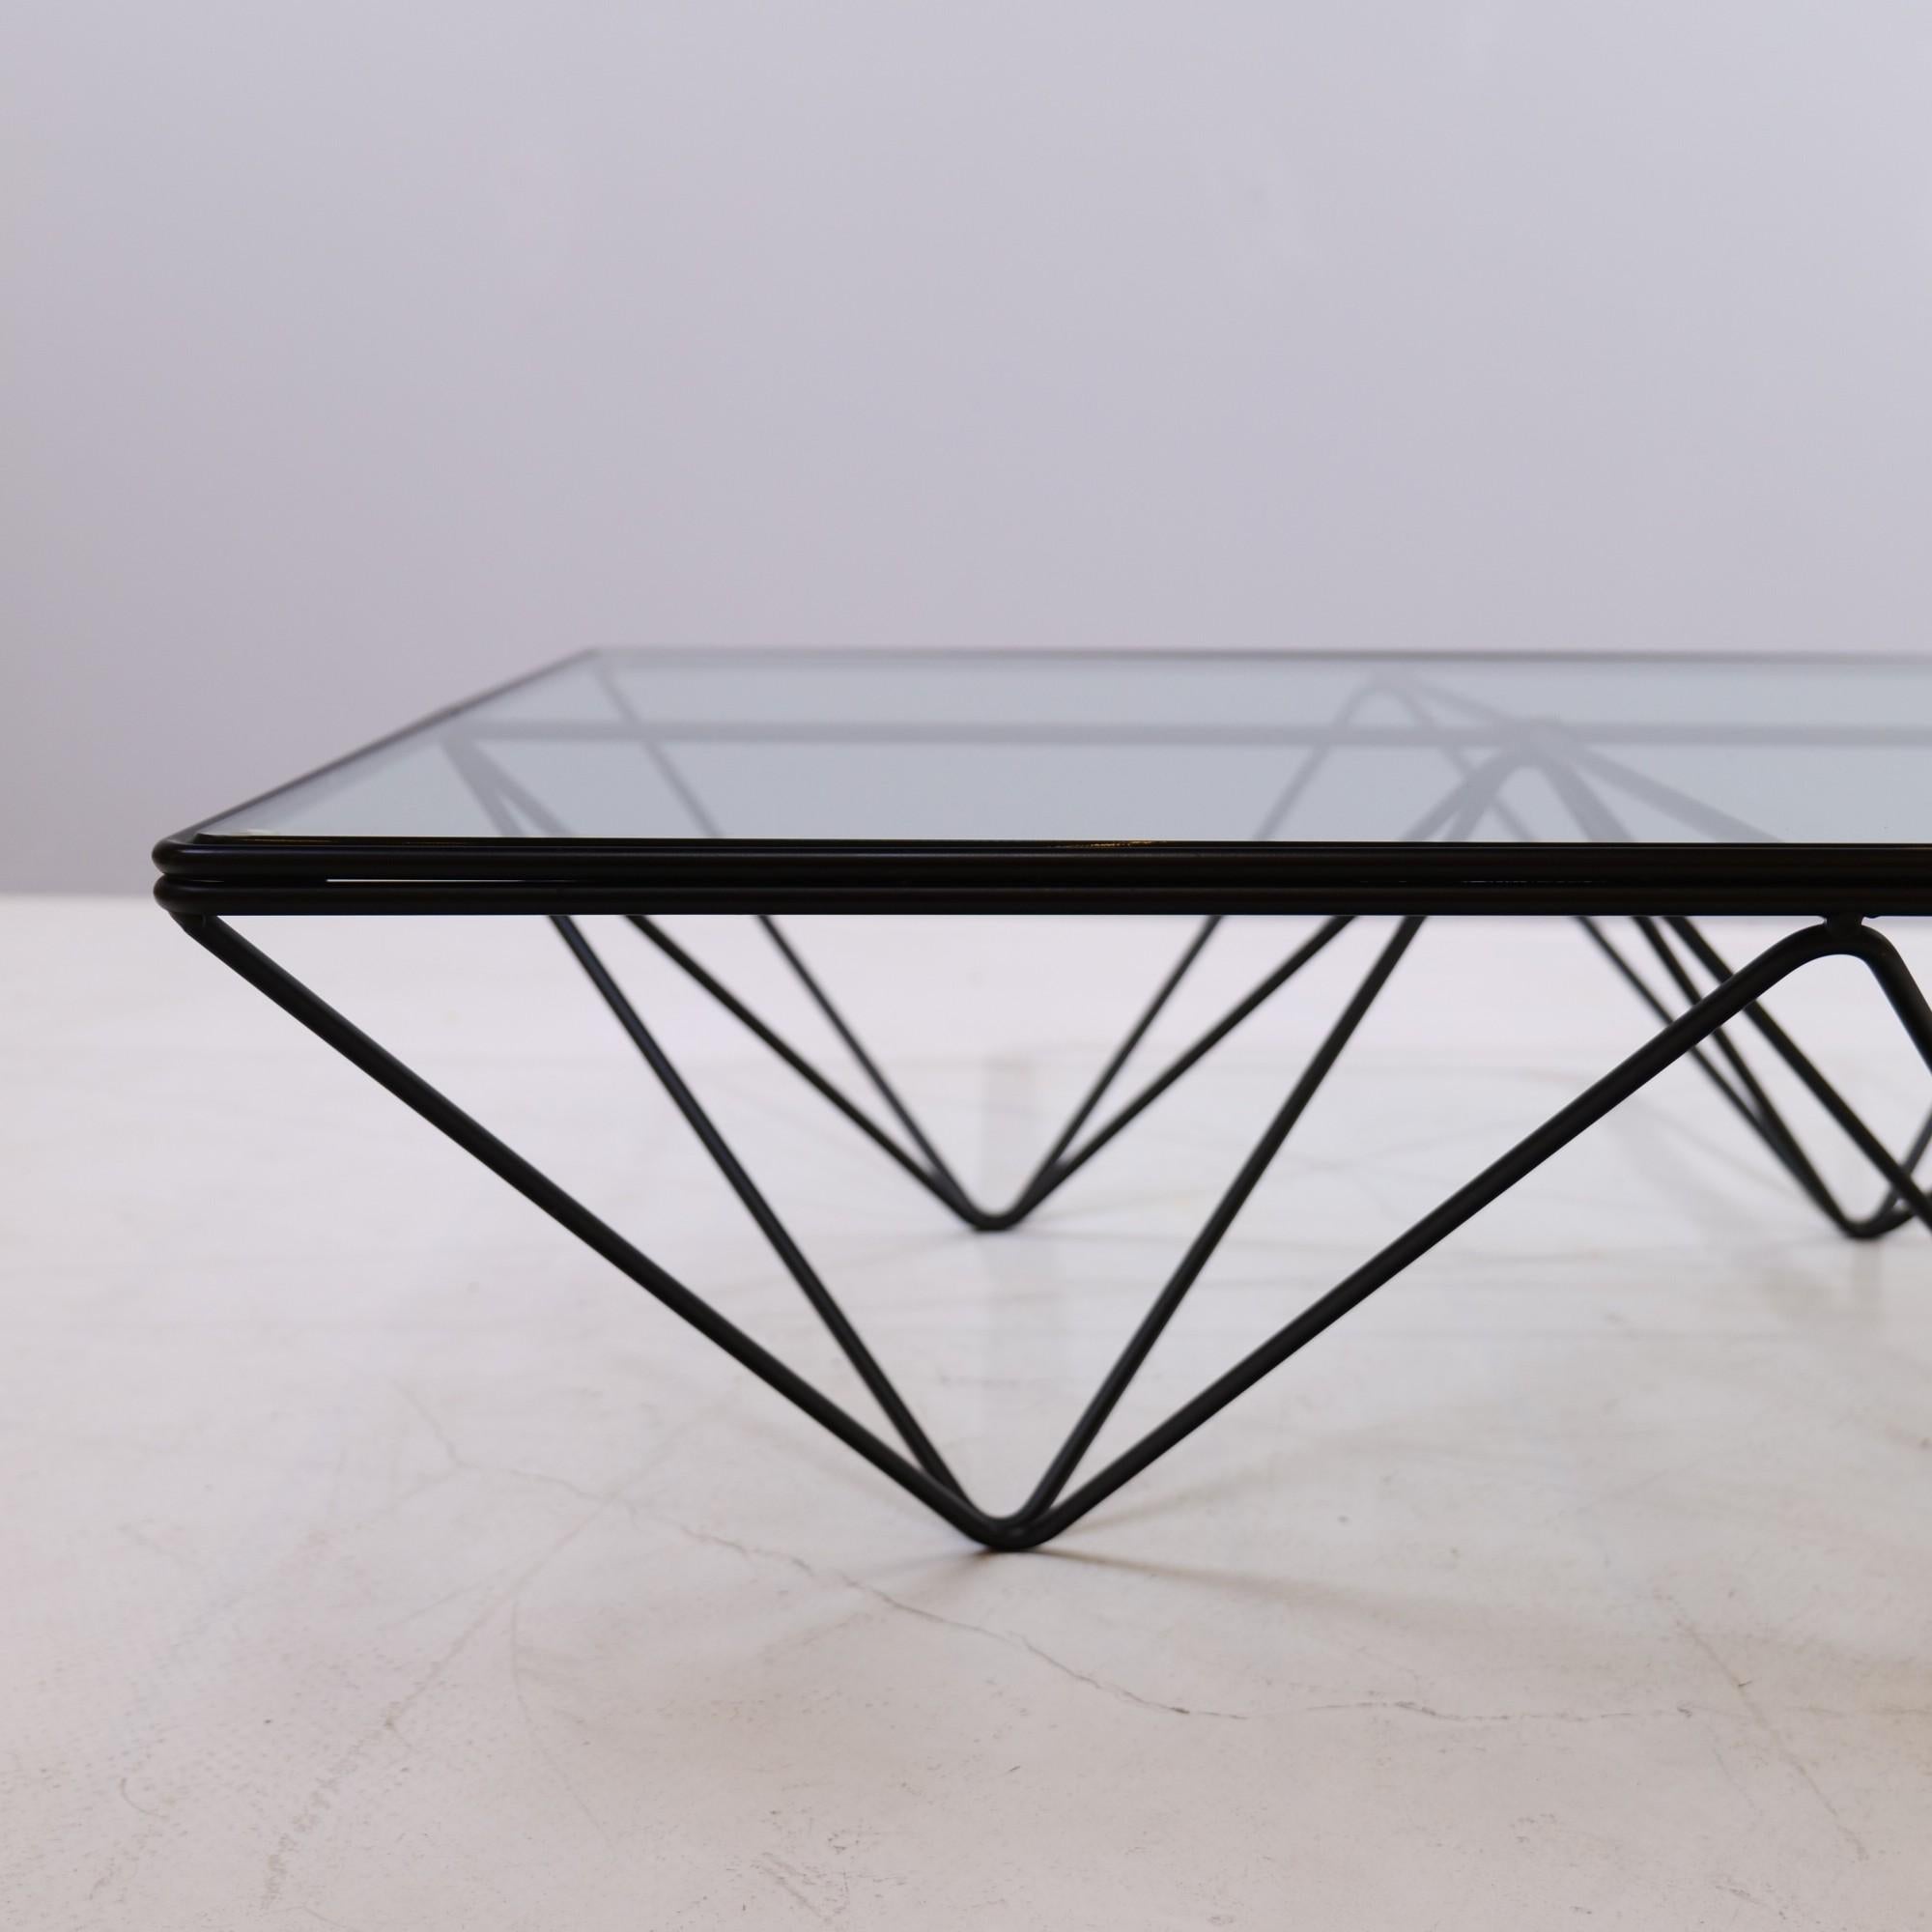 Italian Vintage Modernistic Coffee Table in Style of Paolo Piva for B&B Italia